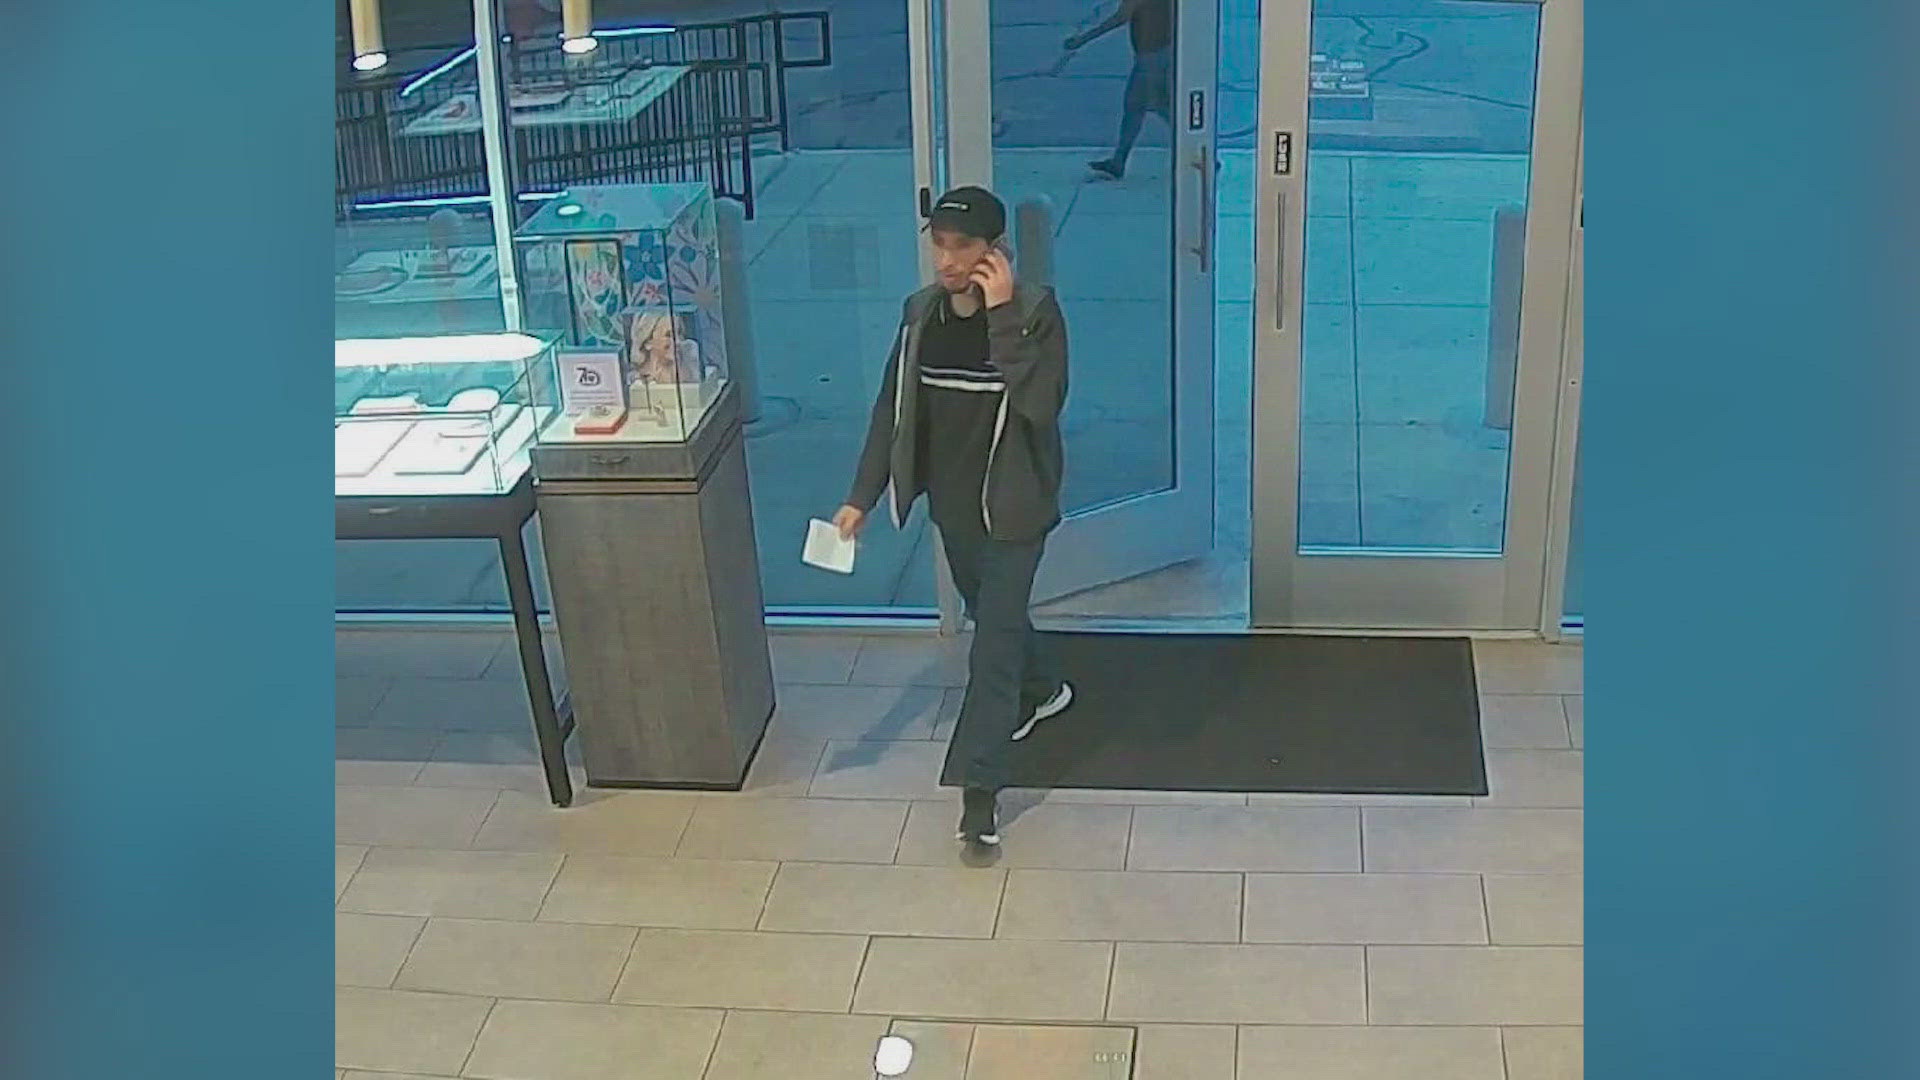 Surveillance photos of man who allegedly stole thousand of dollars in jewelry from James Avery